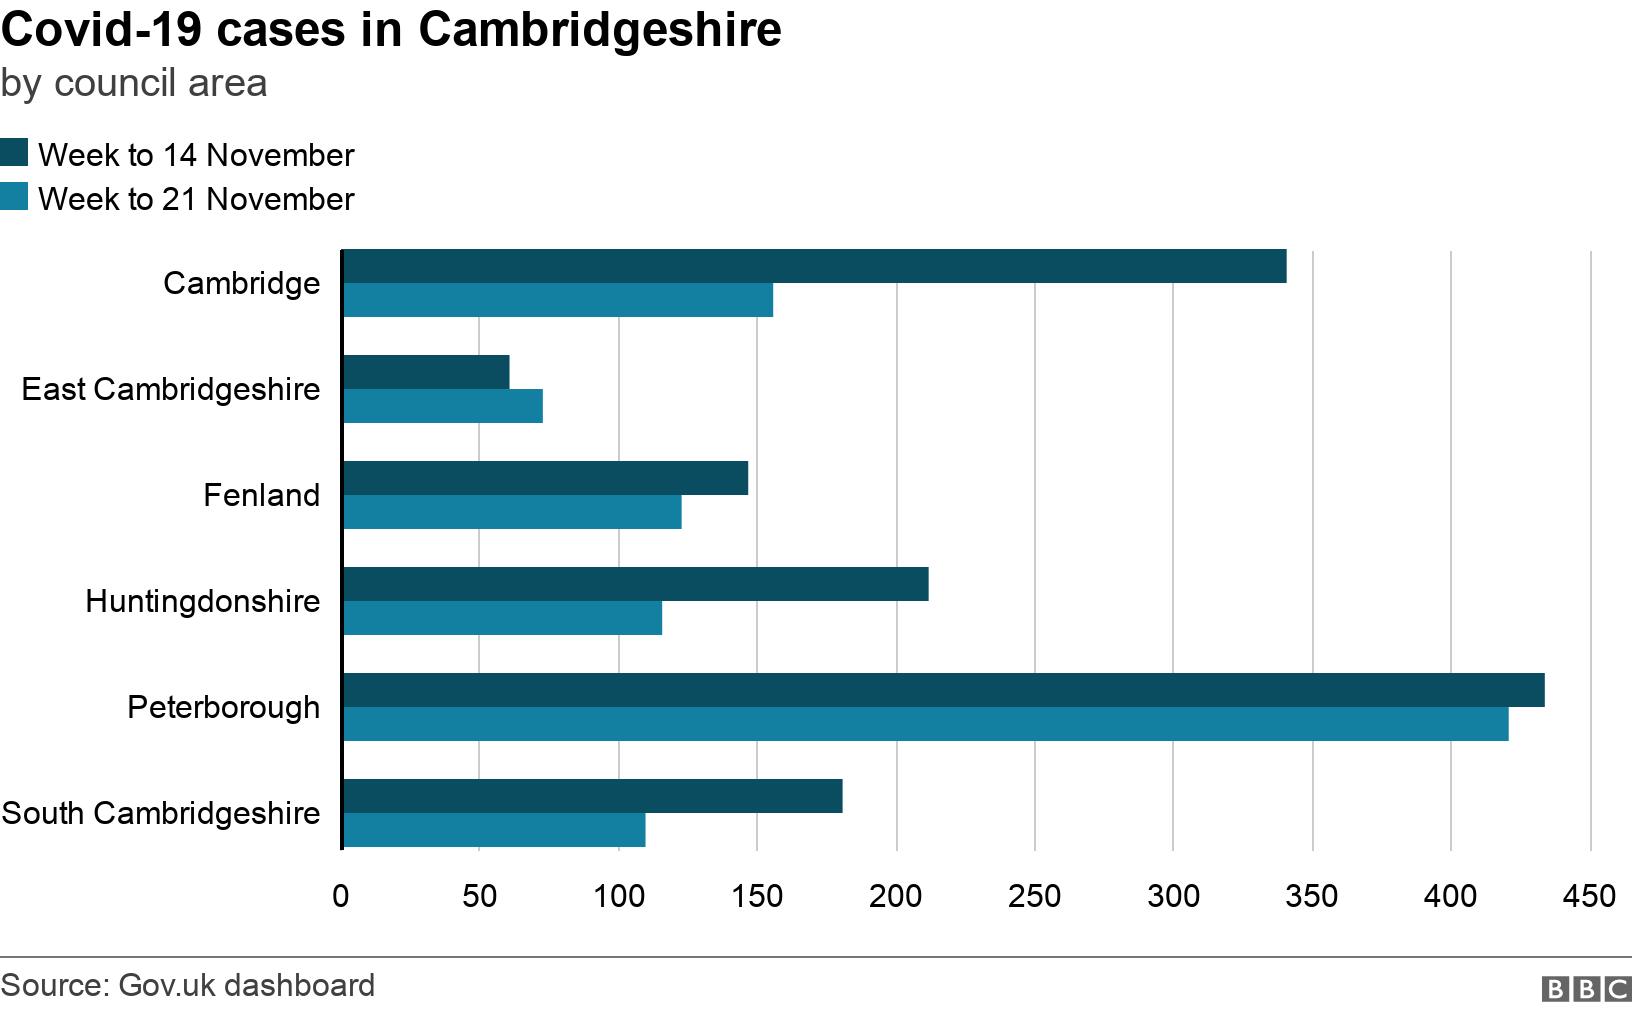 Covid-19 cases in Cambridgeshire. by council area. Cases of Covid-19 in Cambridgeshire by council area in week to 21 November .